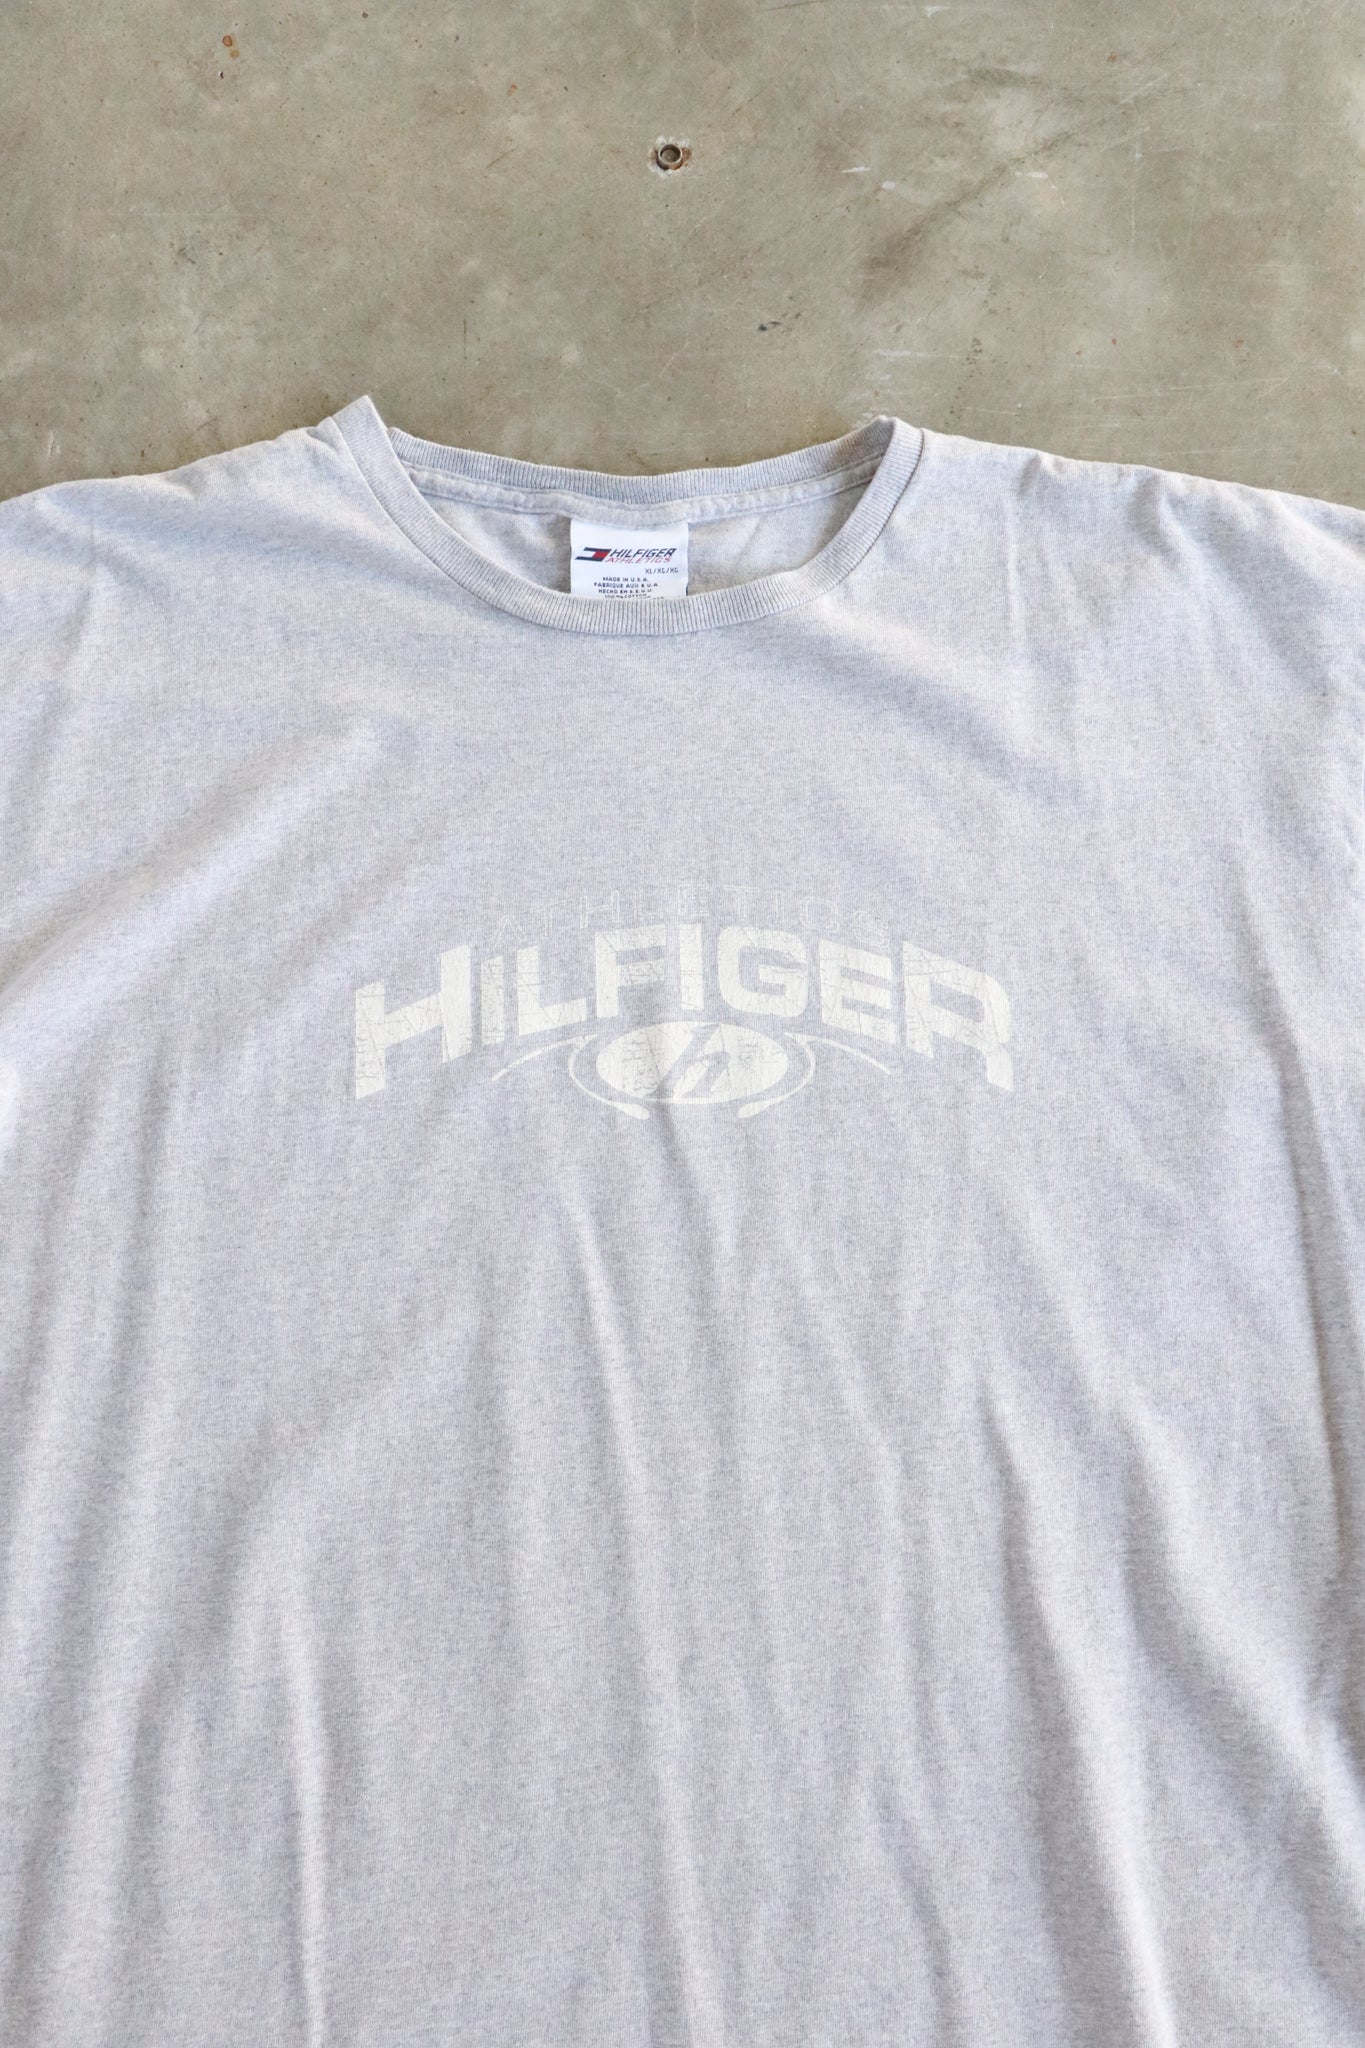 Vintage Tommy Hilfiger Spellout Tee XL